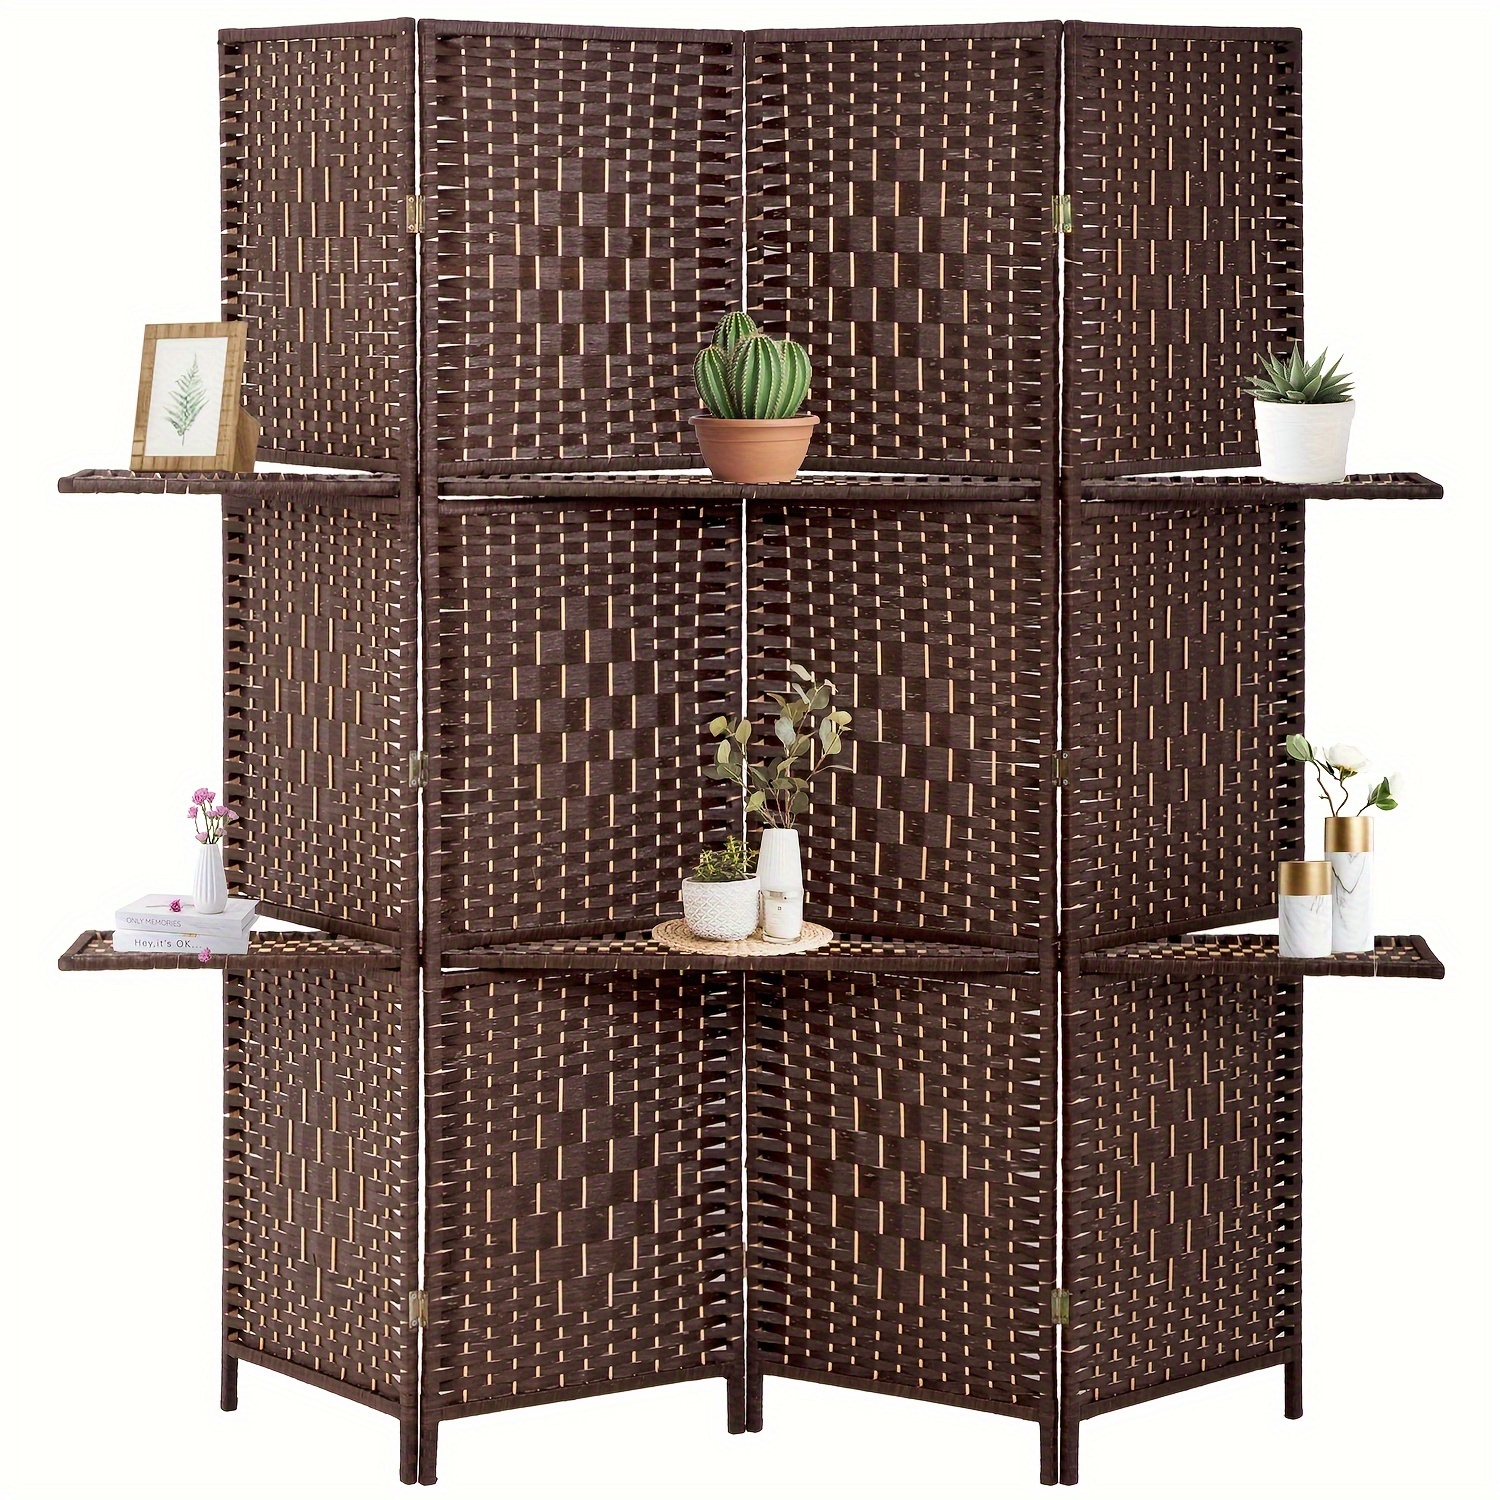 

Room Divider 4 Panel Divider Wooden Screen Folding Portable Partition Screen Wood With Removable Storage Shelves